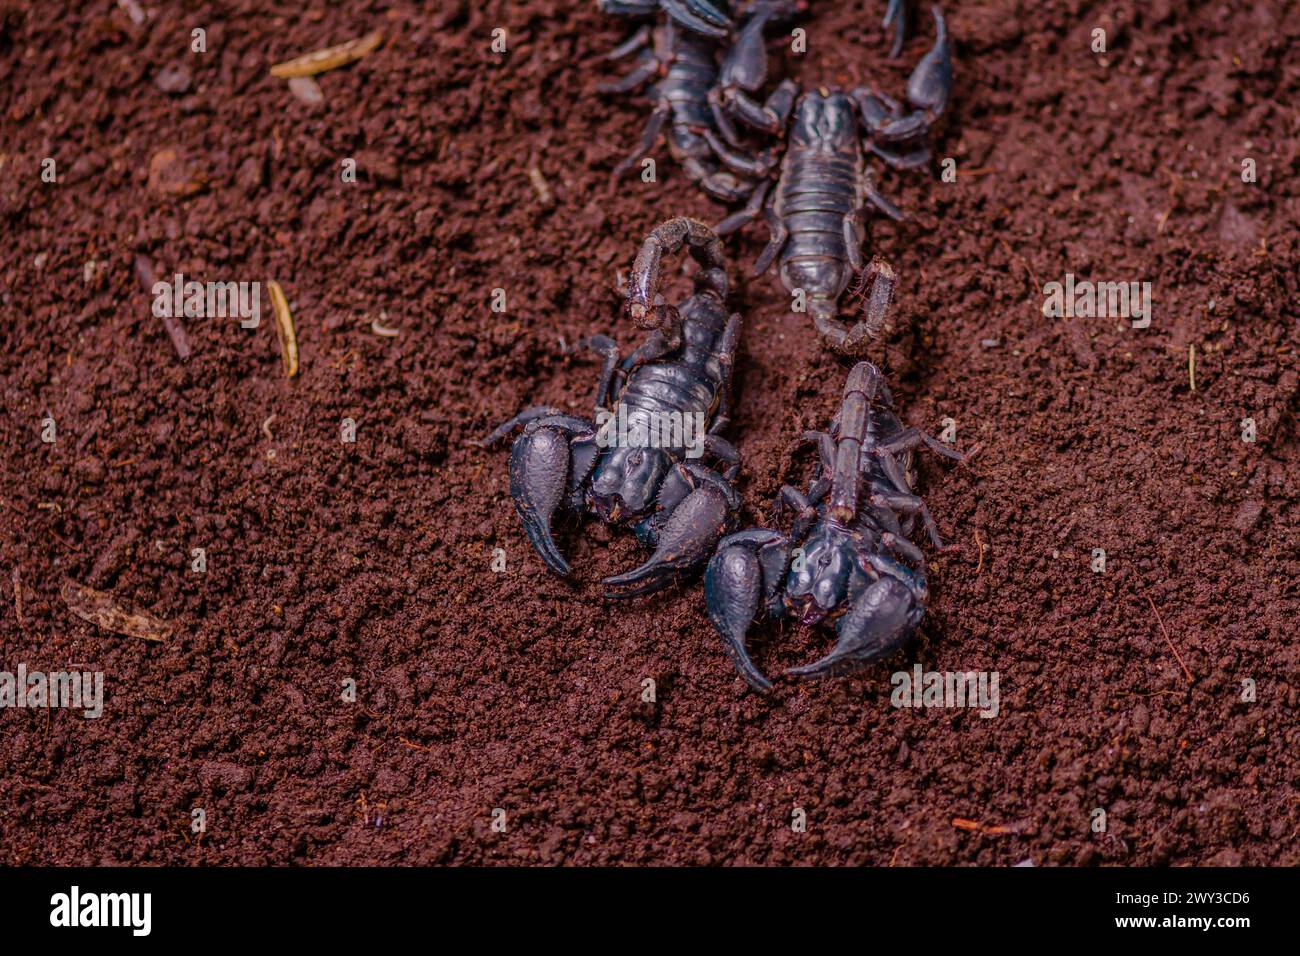 Top view of large black scorpions on bed of moist dirt in Thailand Stock Photo